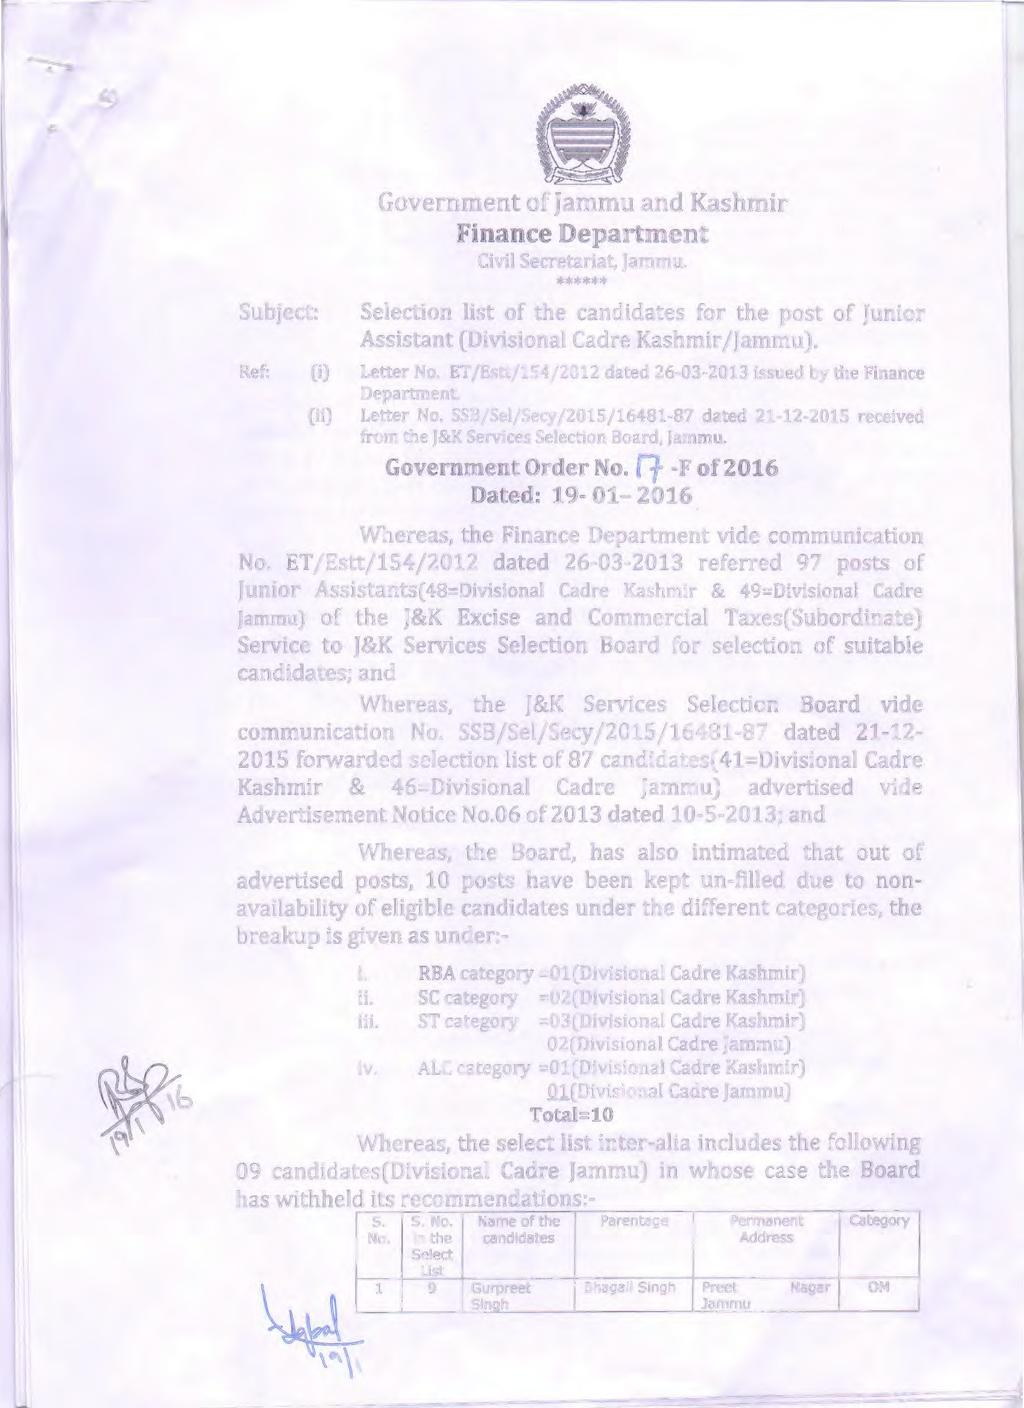 = L Subject: Government of Jammu and Kashmir Finance Department Civil Secretariat, Jammu. ****** Selection list of the candidates for the post of Junior Assistant (Divisional Cadre Kashmir /Jammu).